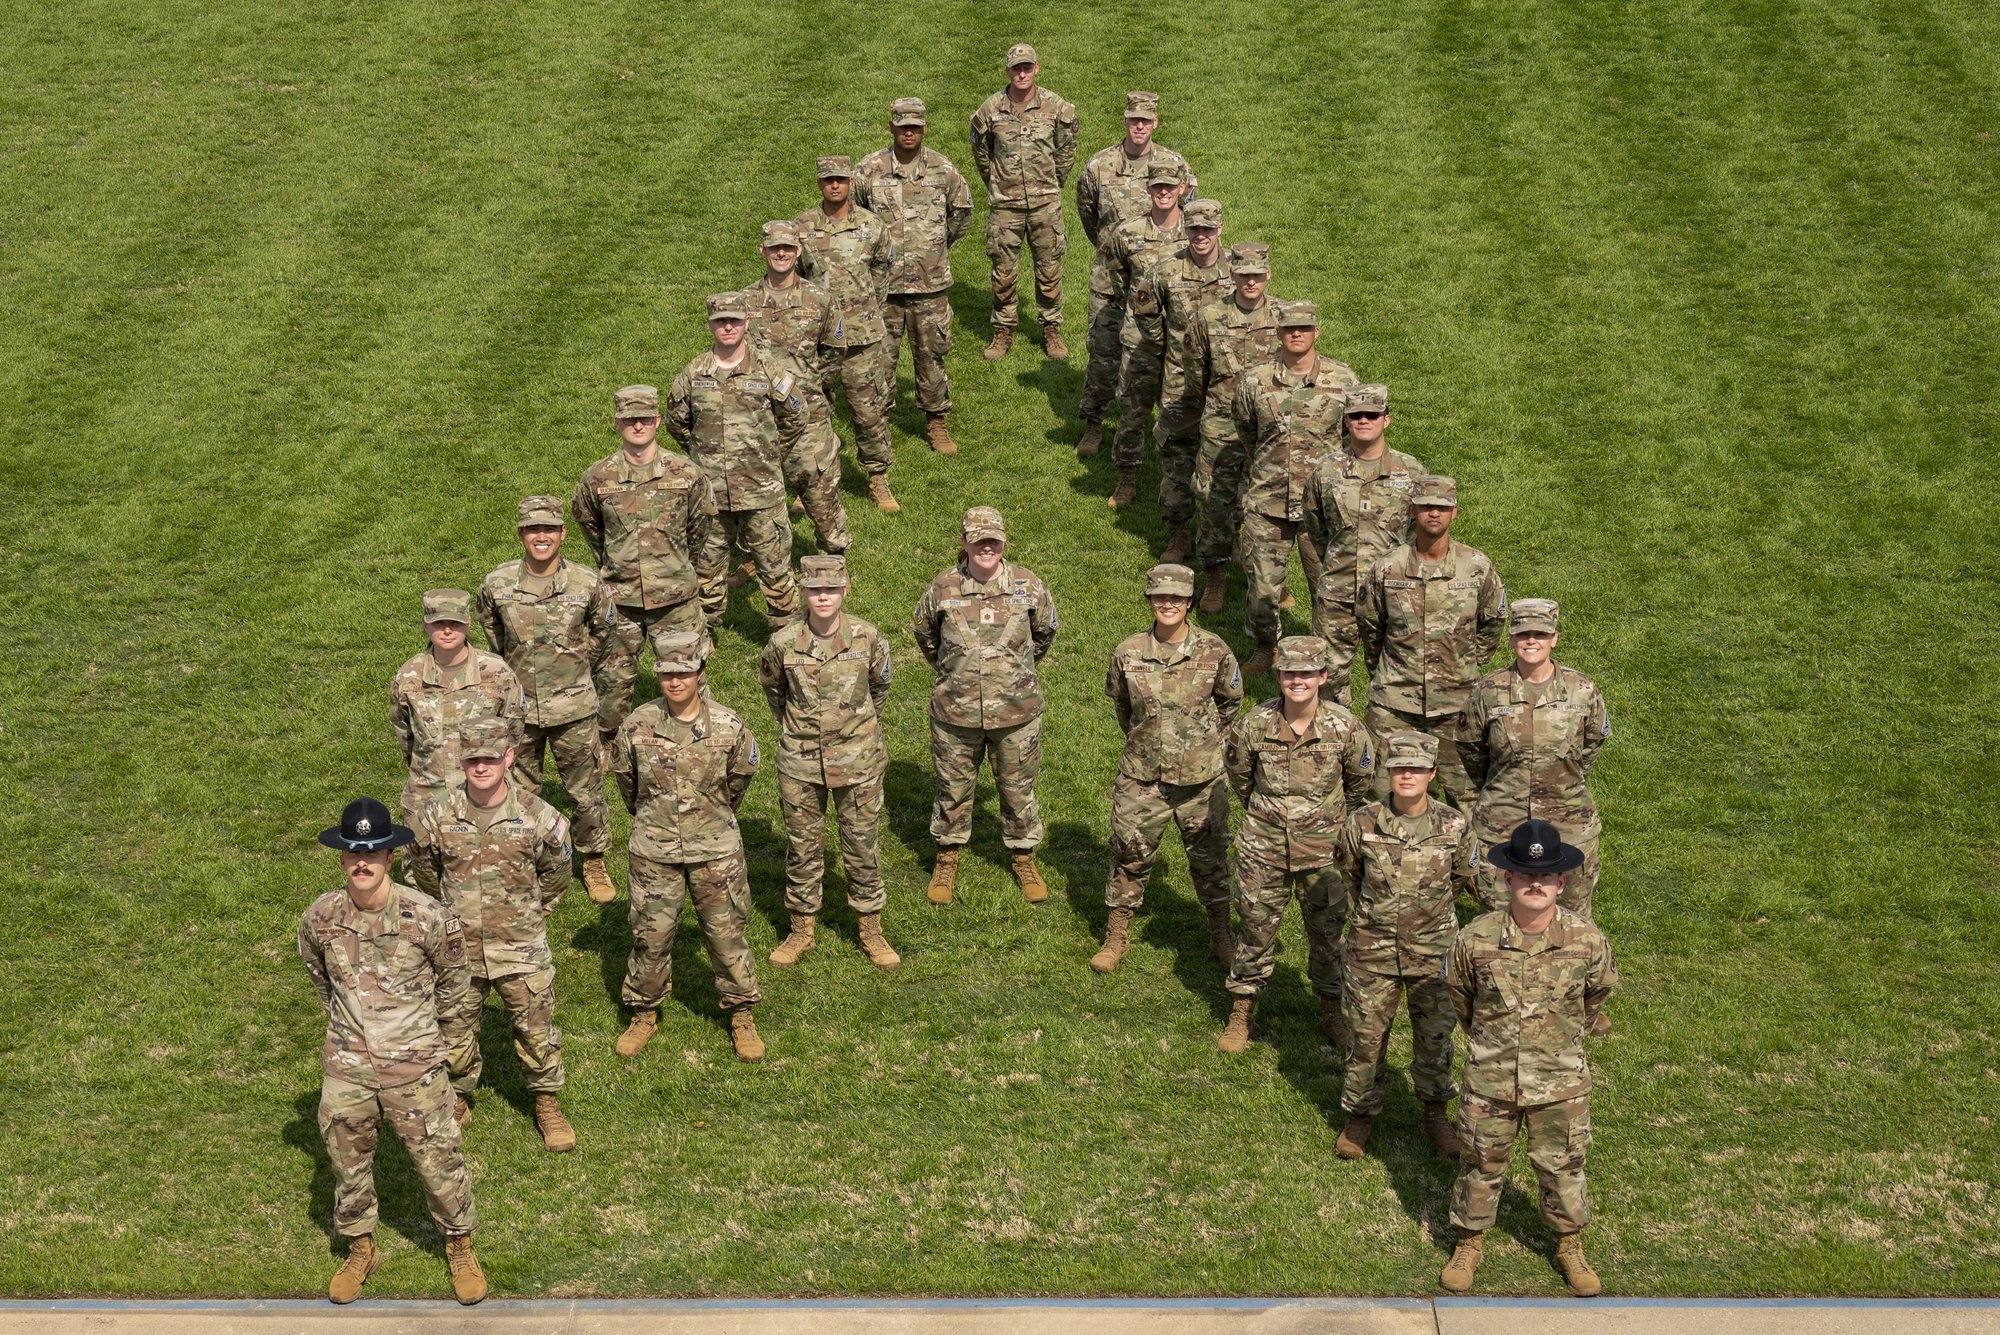 Space Force cadets and Air Force enlisted military training instructors at Officer Training School gather in a ‘delta’ formation on Welch Field, Maxwell Air Force Base.